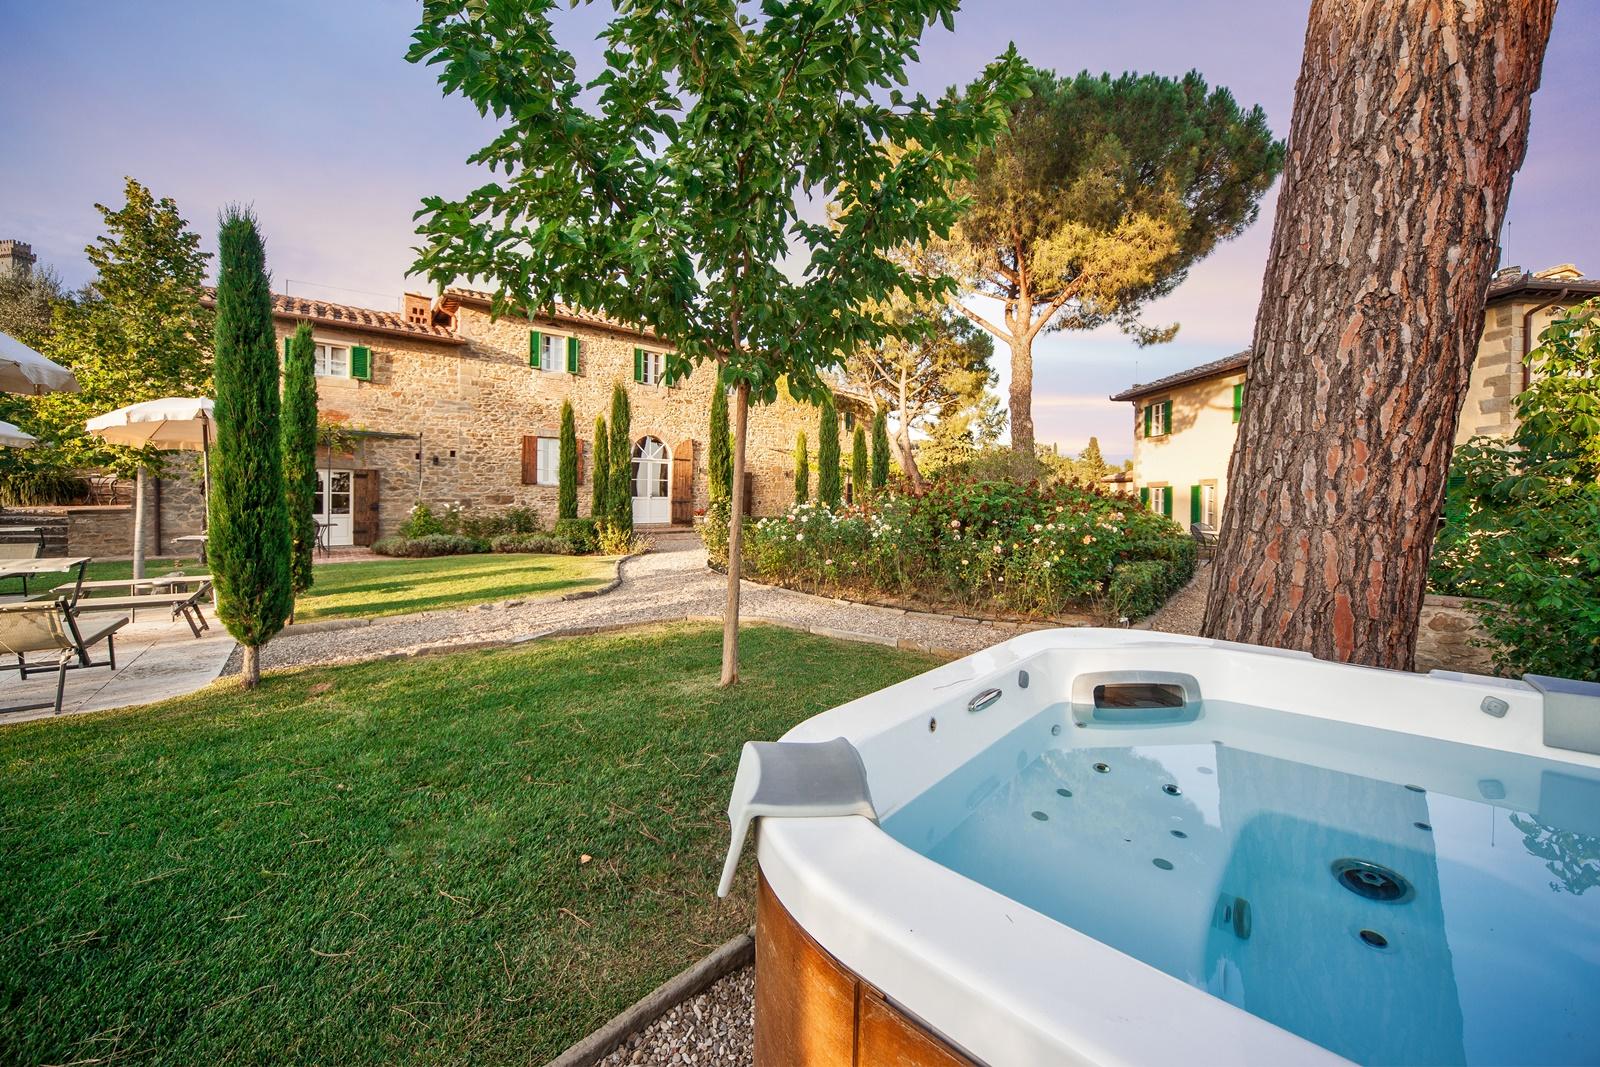 The jacuzzi on the grounds of Villa Nocciola, Tuscany